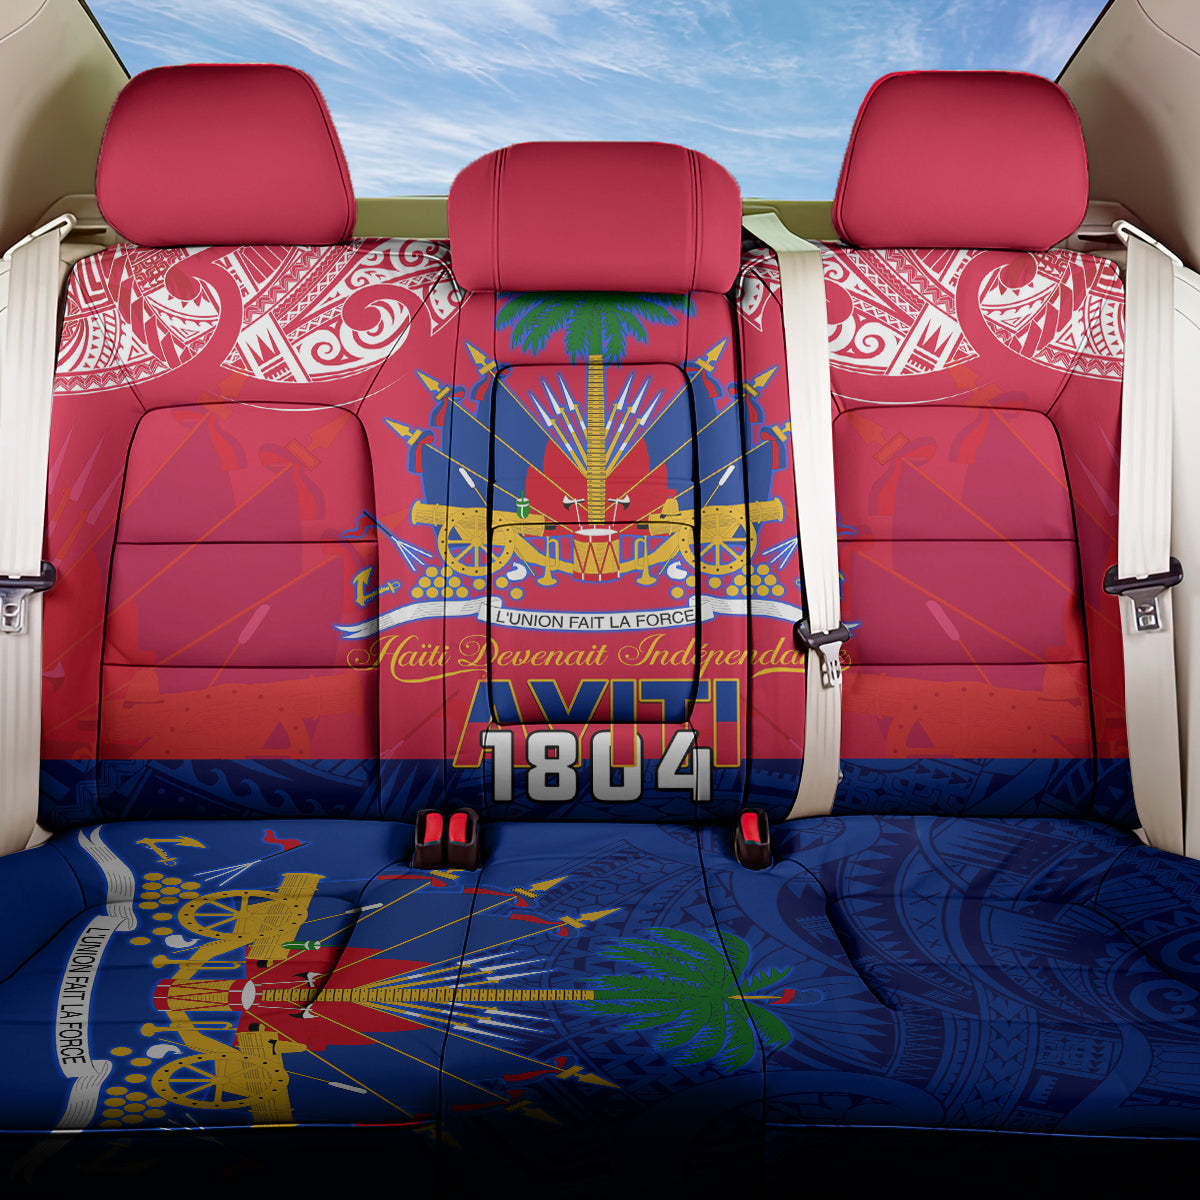 haiti-independence-day-back-car-seat-cover-libete-egalite-fratenite-ayiti-1804-with-polynesian-pattern